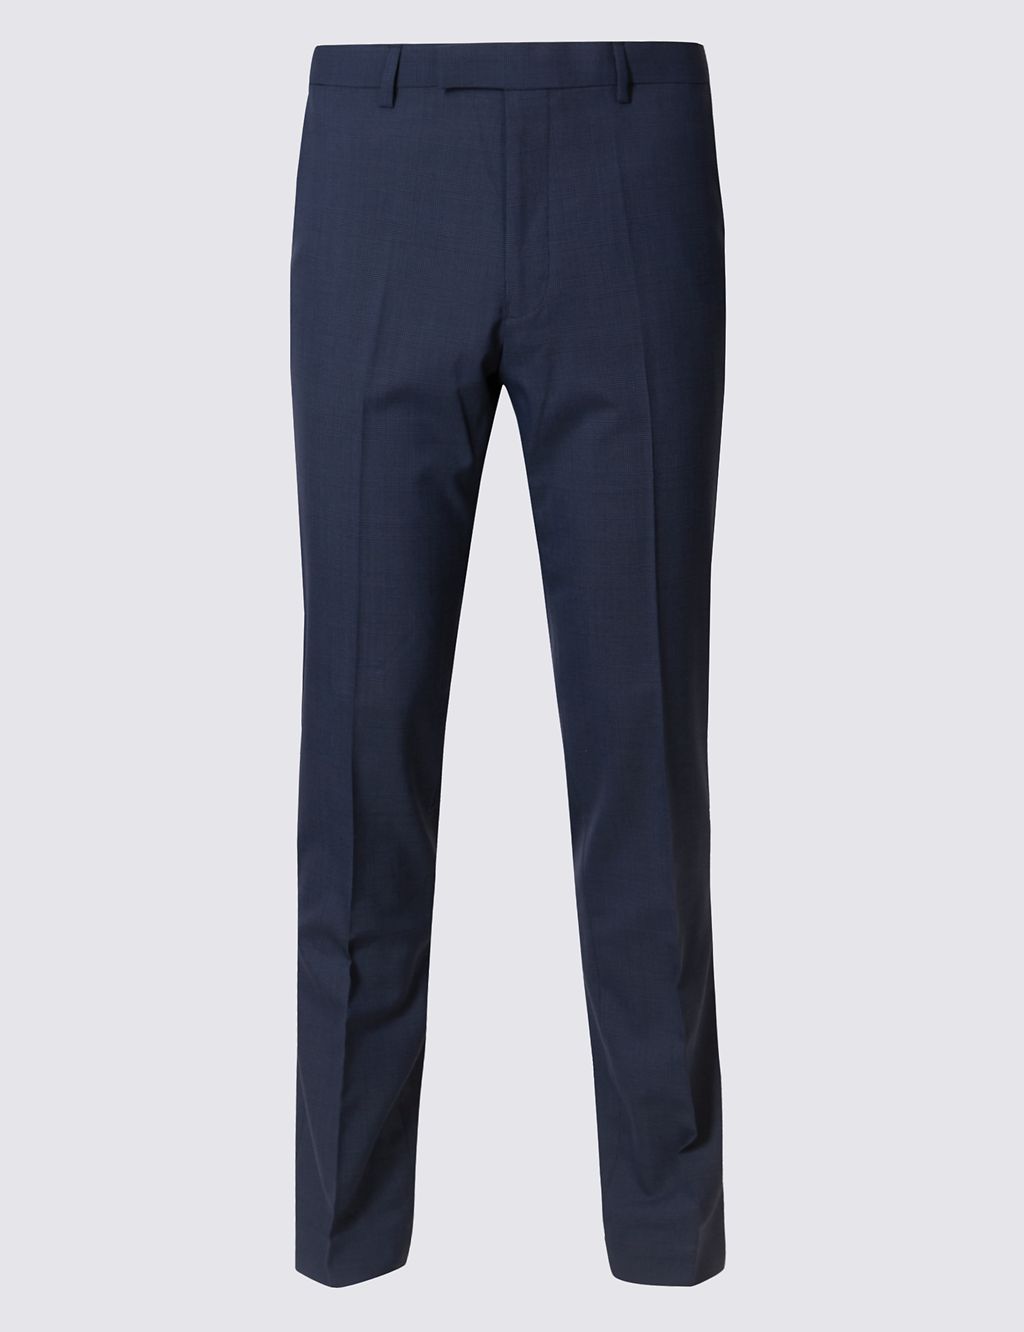 Blue Checked Modern Slim Fit Trousers 1 of 5